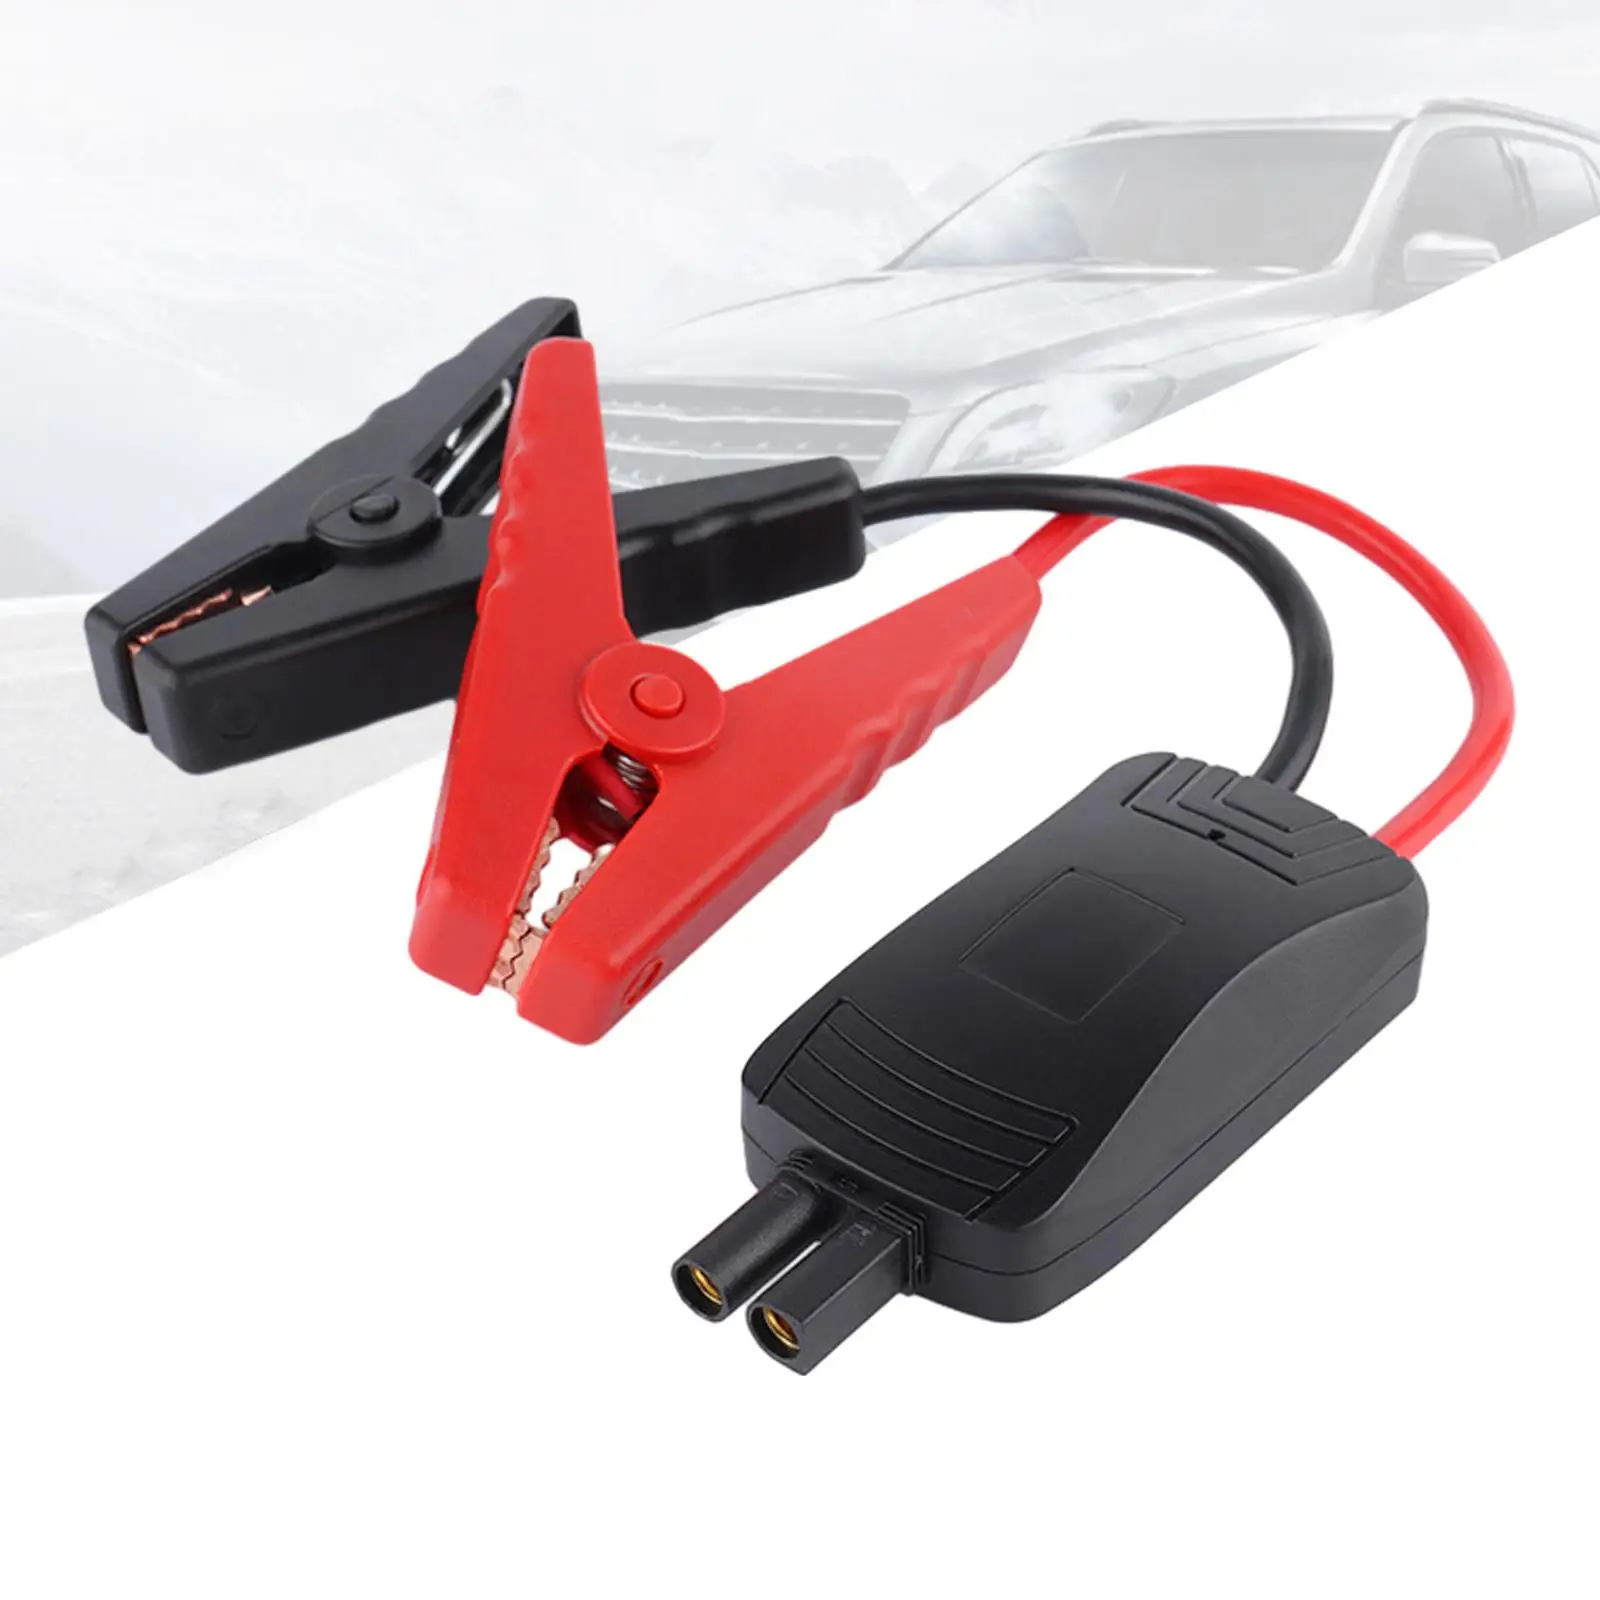 Generic Jump Starter Cable with Battery Clamps Replacement Automotive Booster Clamp Cables 12V Car Battery Clamps for Truck